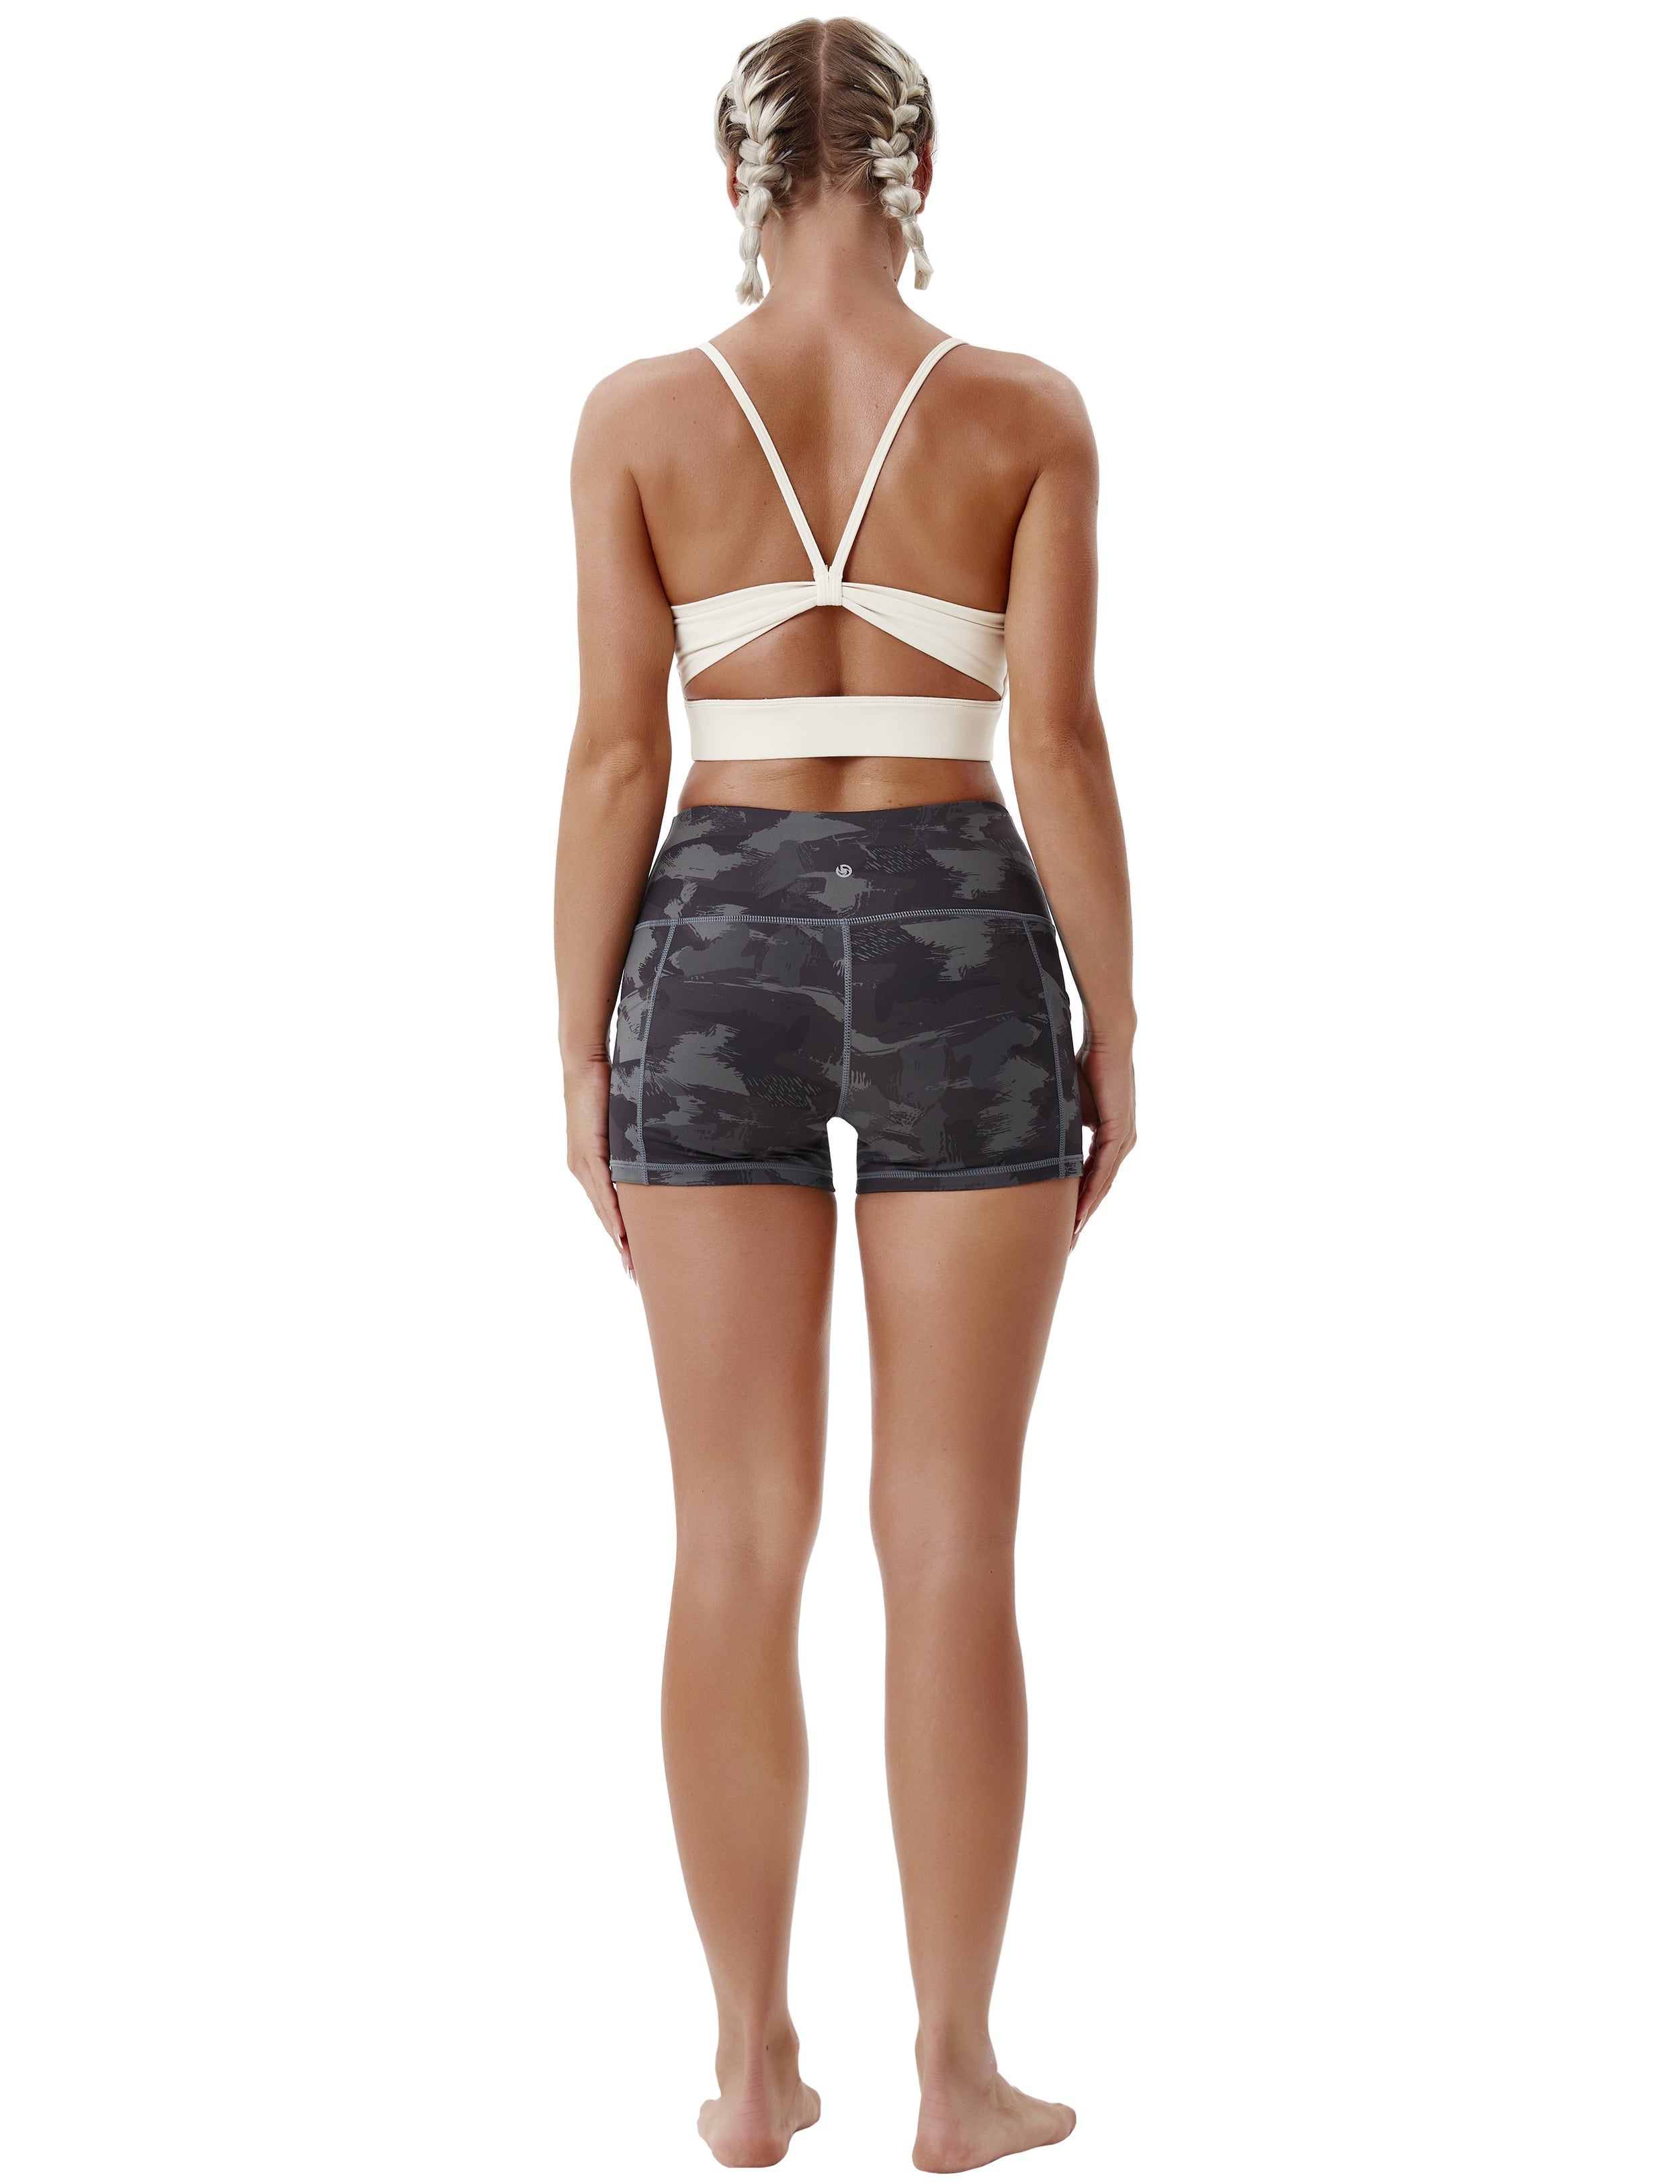 2.5" Printed Side Pockets yogastudio Shorts dimgray brushcamo Sleek, soft, smooth and totally comfortable: our newest sexy style is here. Softest-ever fabric High elasticity High density 4-way stretch Fabric doesn't attract lint easily No see-through Moisture-wicking Machine wash 78% Polyester, 22% Spandex